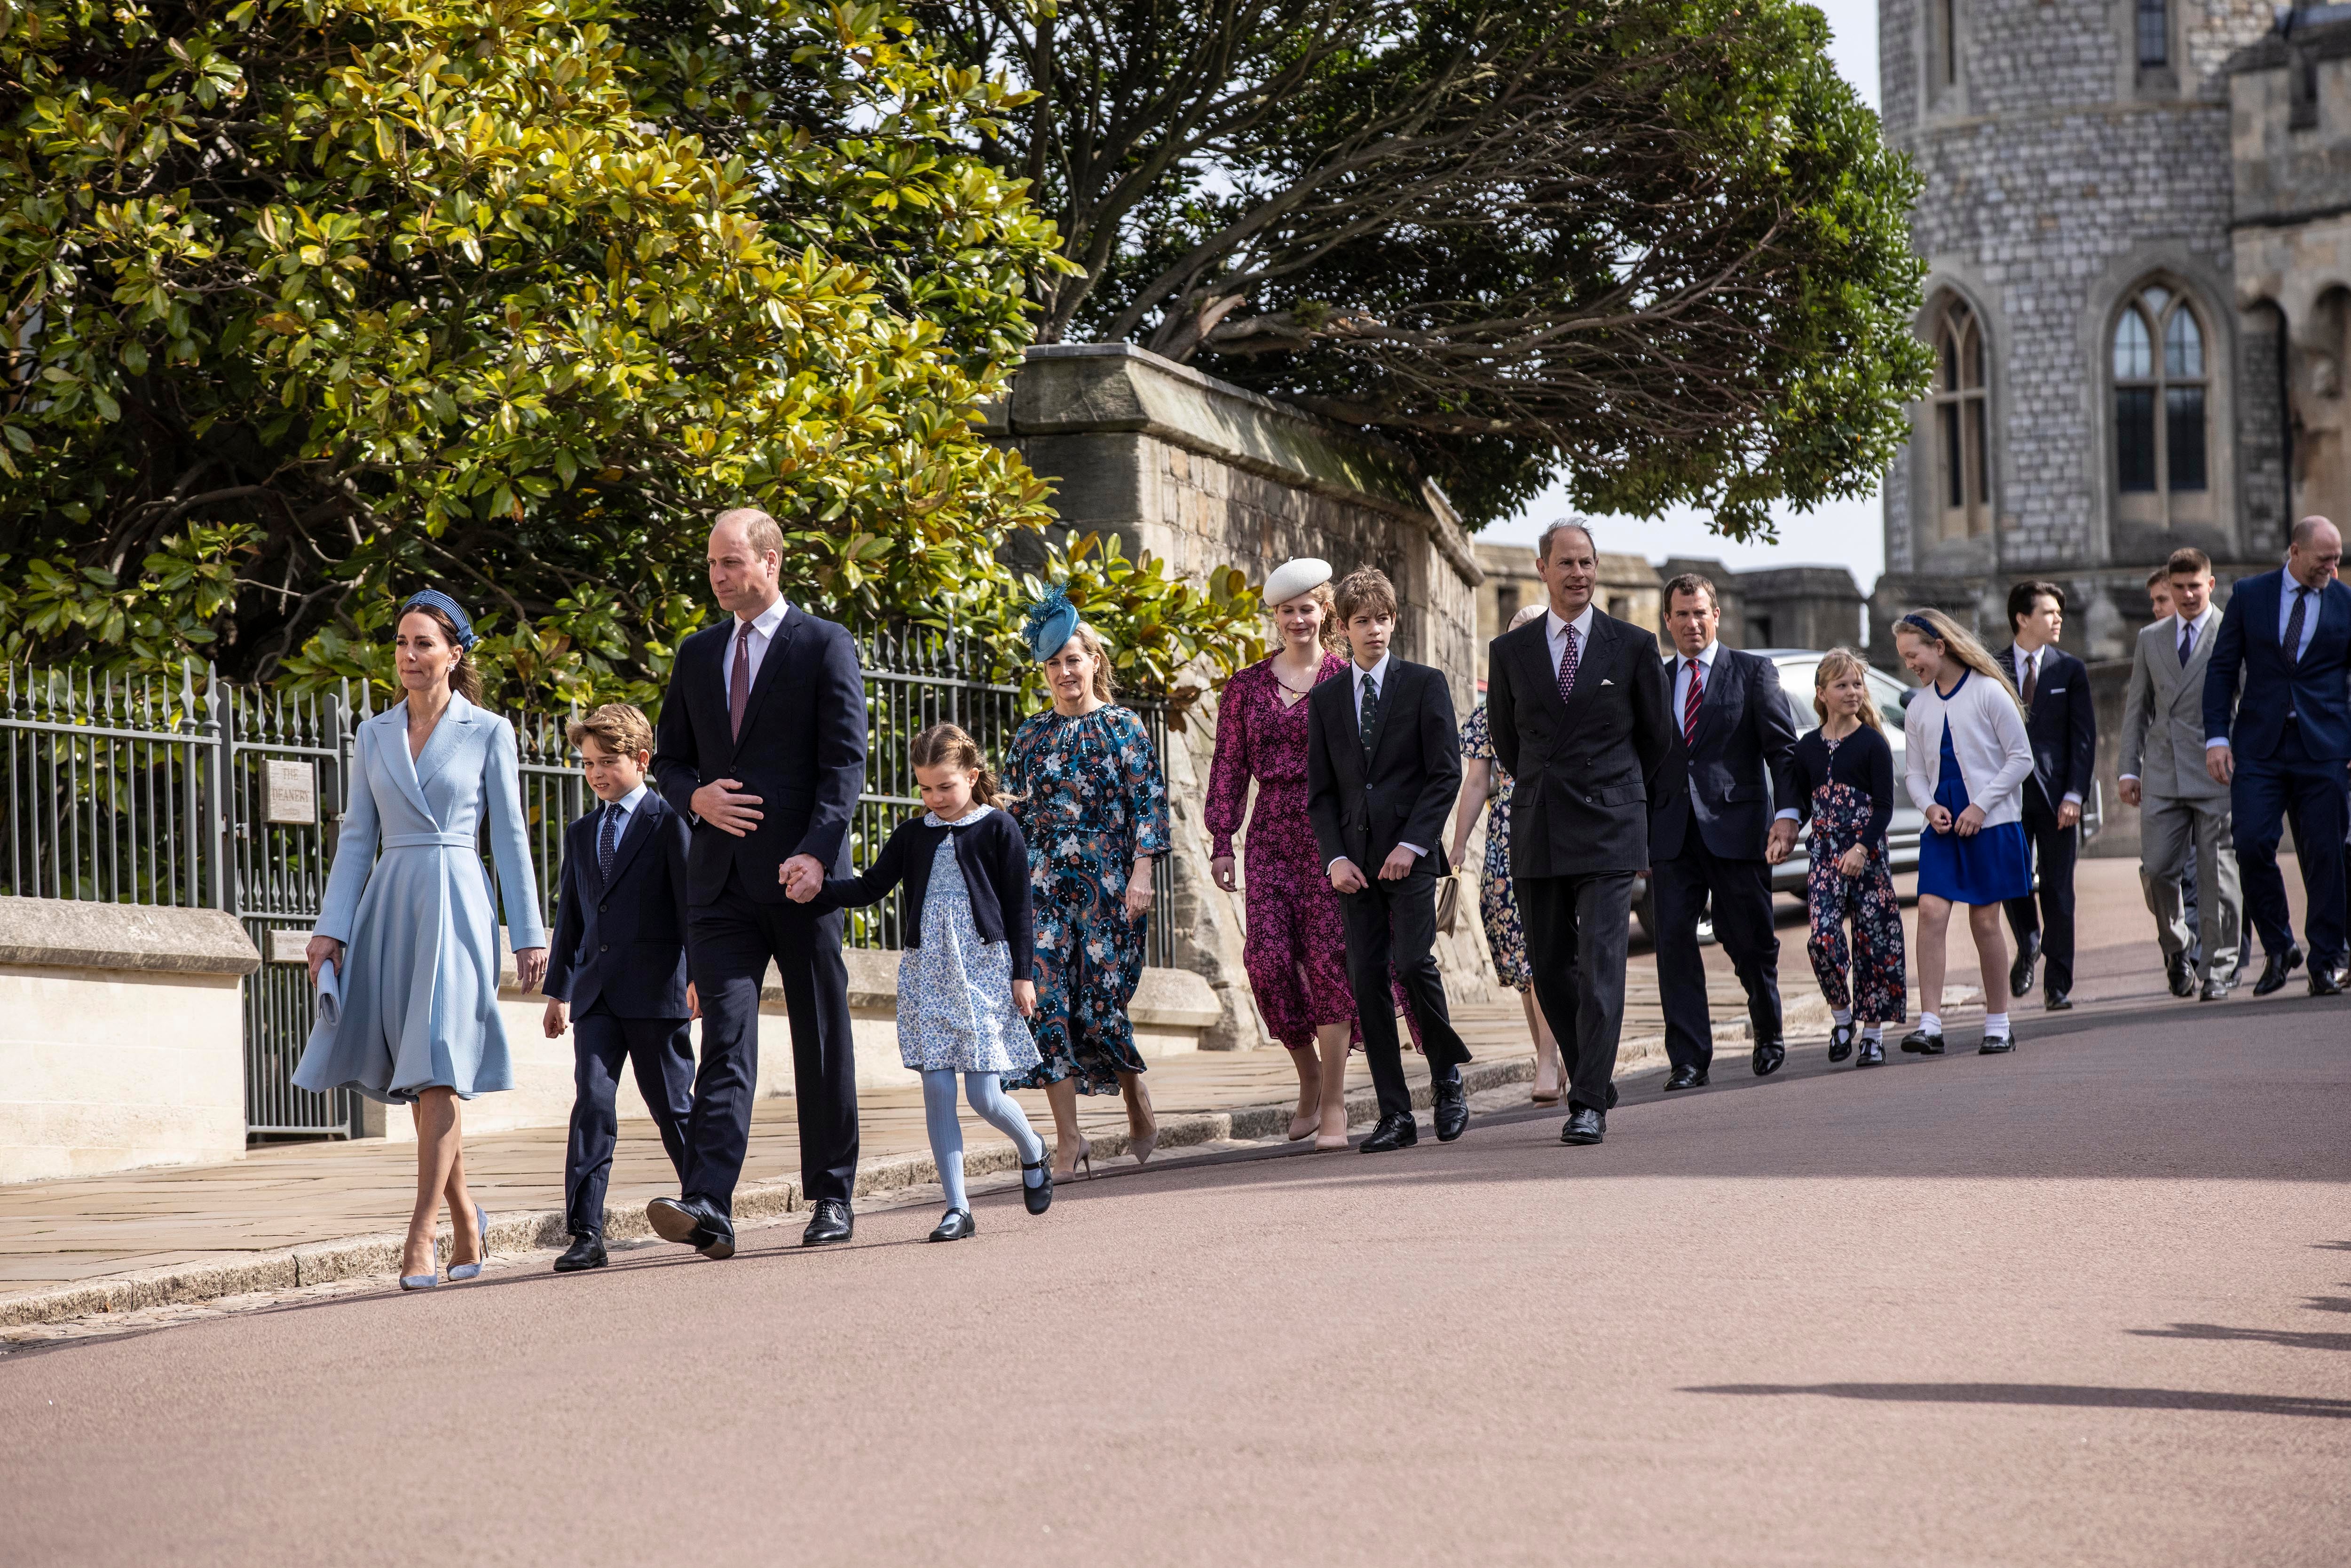 Prince William, Duke of Cambridge, Catherine, Duchess of Cambridge attend the Easter Matins Service at St George's Chapel at Windsor Castle on April 17, 2022